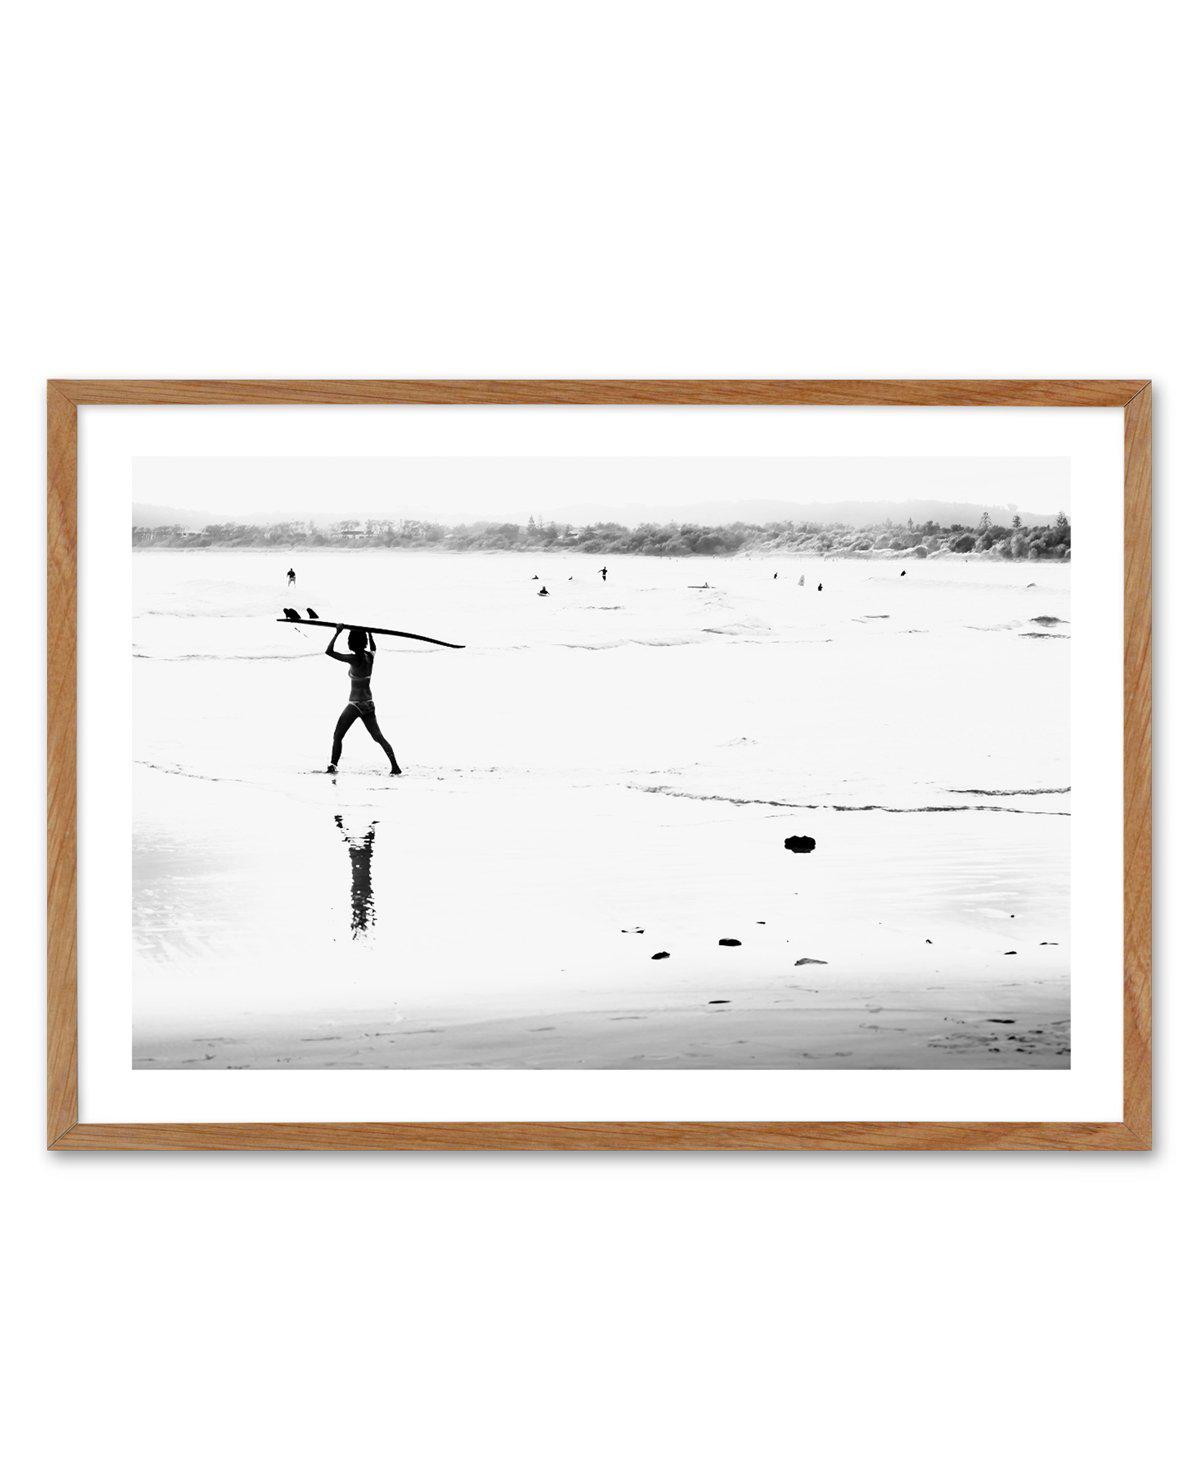 SHOP Byron Bay, The Pass | Surfer Ocean Photographic Art Print or ...